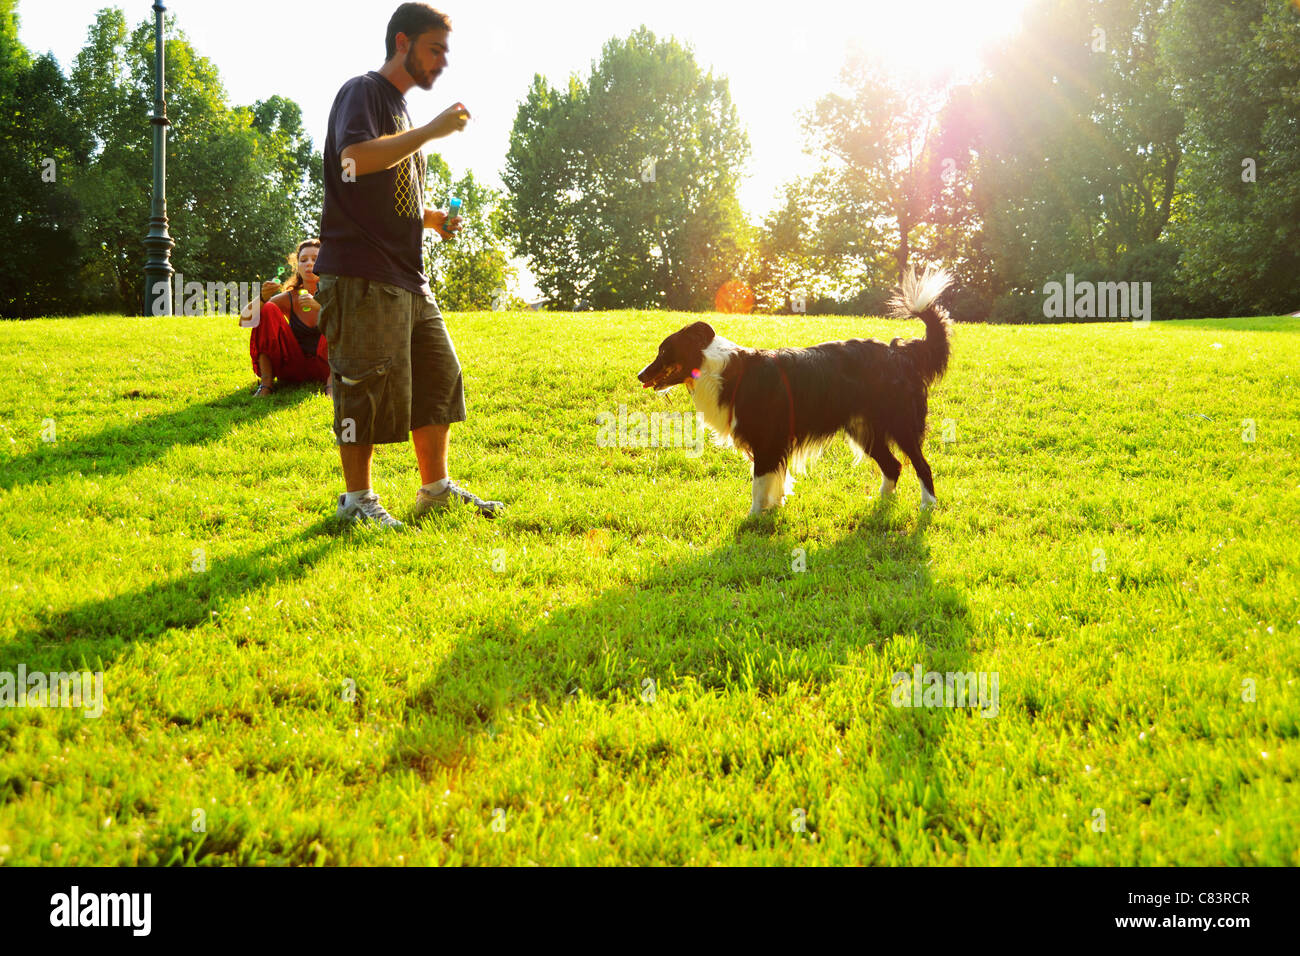 Man playing with dog in park Stock Photo